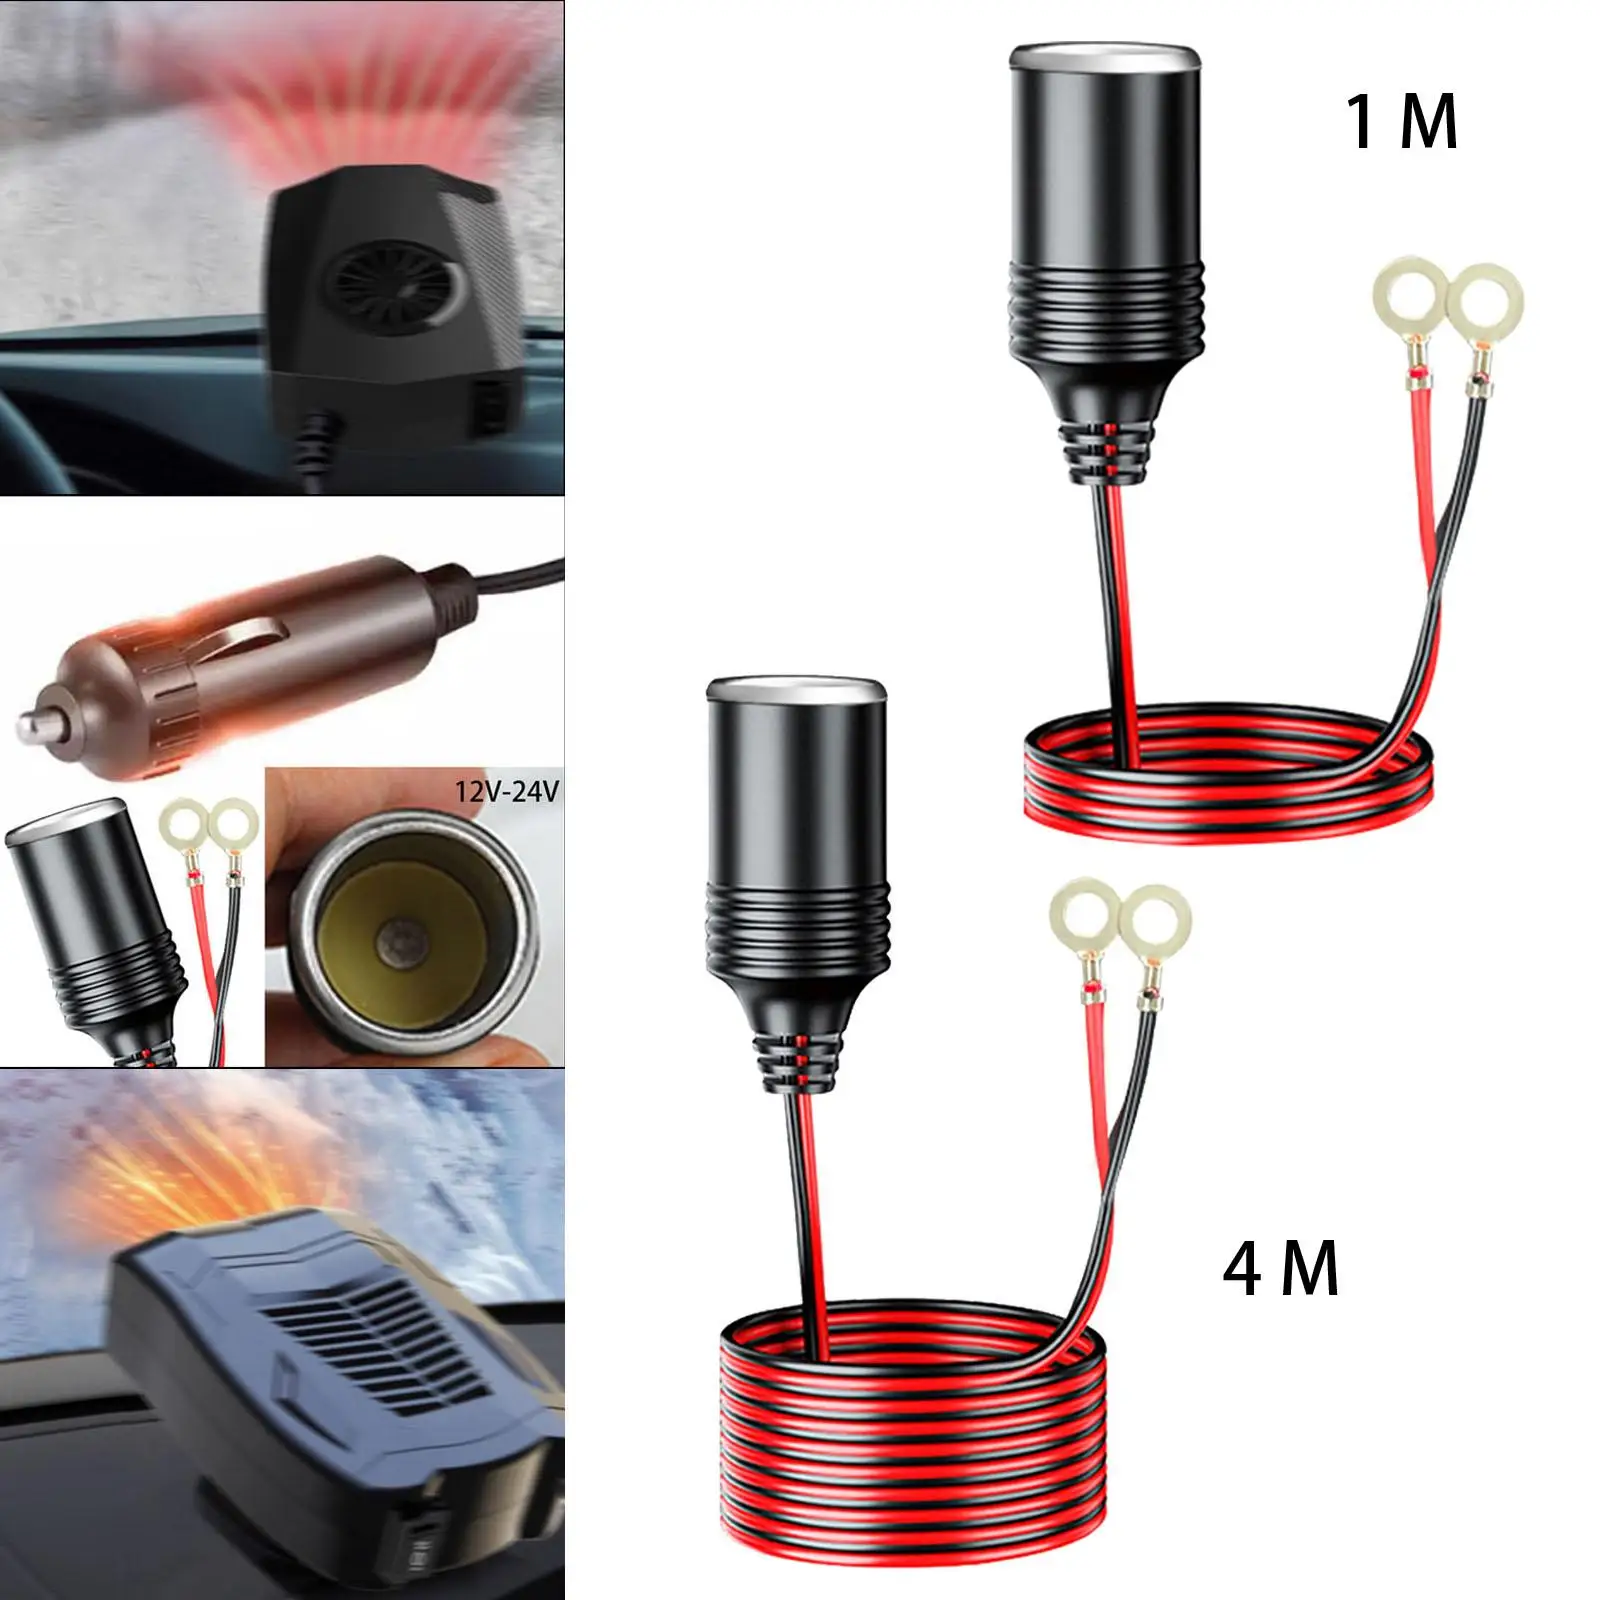 Cigarette Lighter Adapter Power Supply Cord Easy Installation Replaces Accessories Female Plug Outlet to Eyelet Terminals